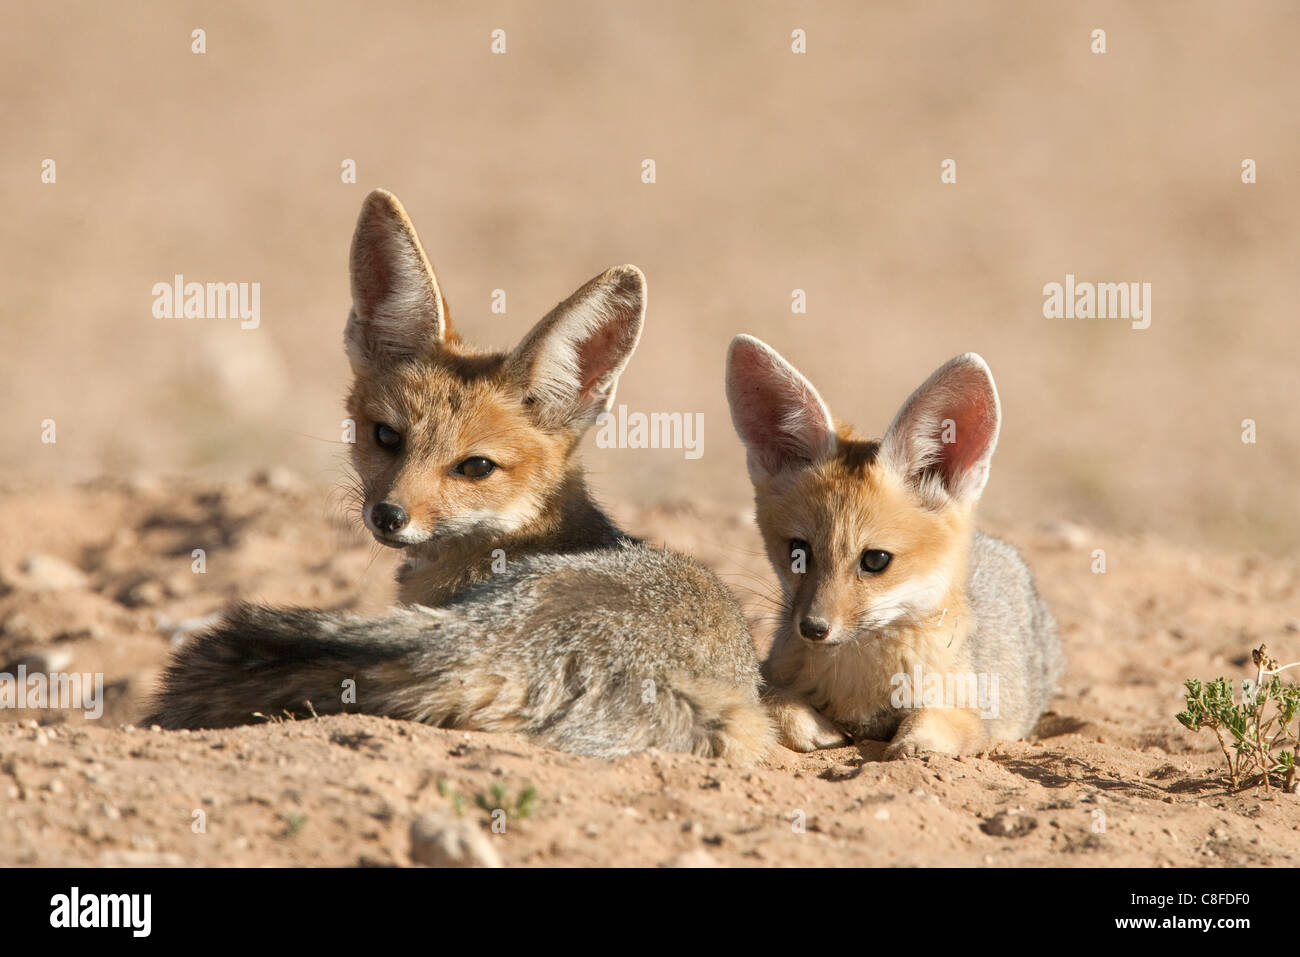 Capo volpe (Vulpes vulpes chama) cubs, Kgalagadi Parco transfrontaliero, Northern Cape, Sud Africa Foto Stock